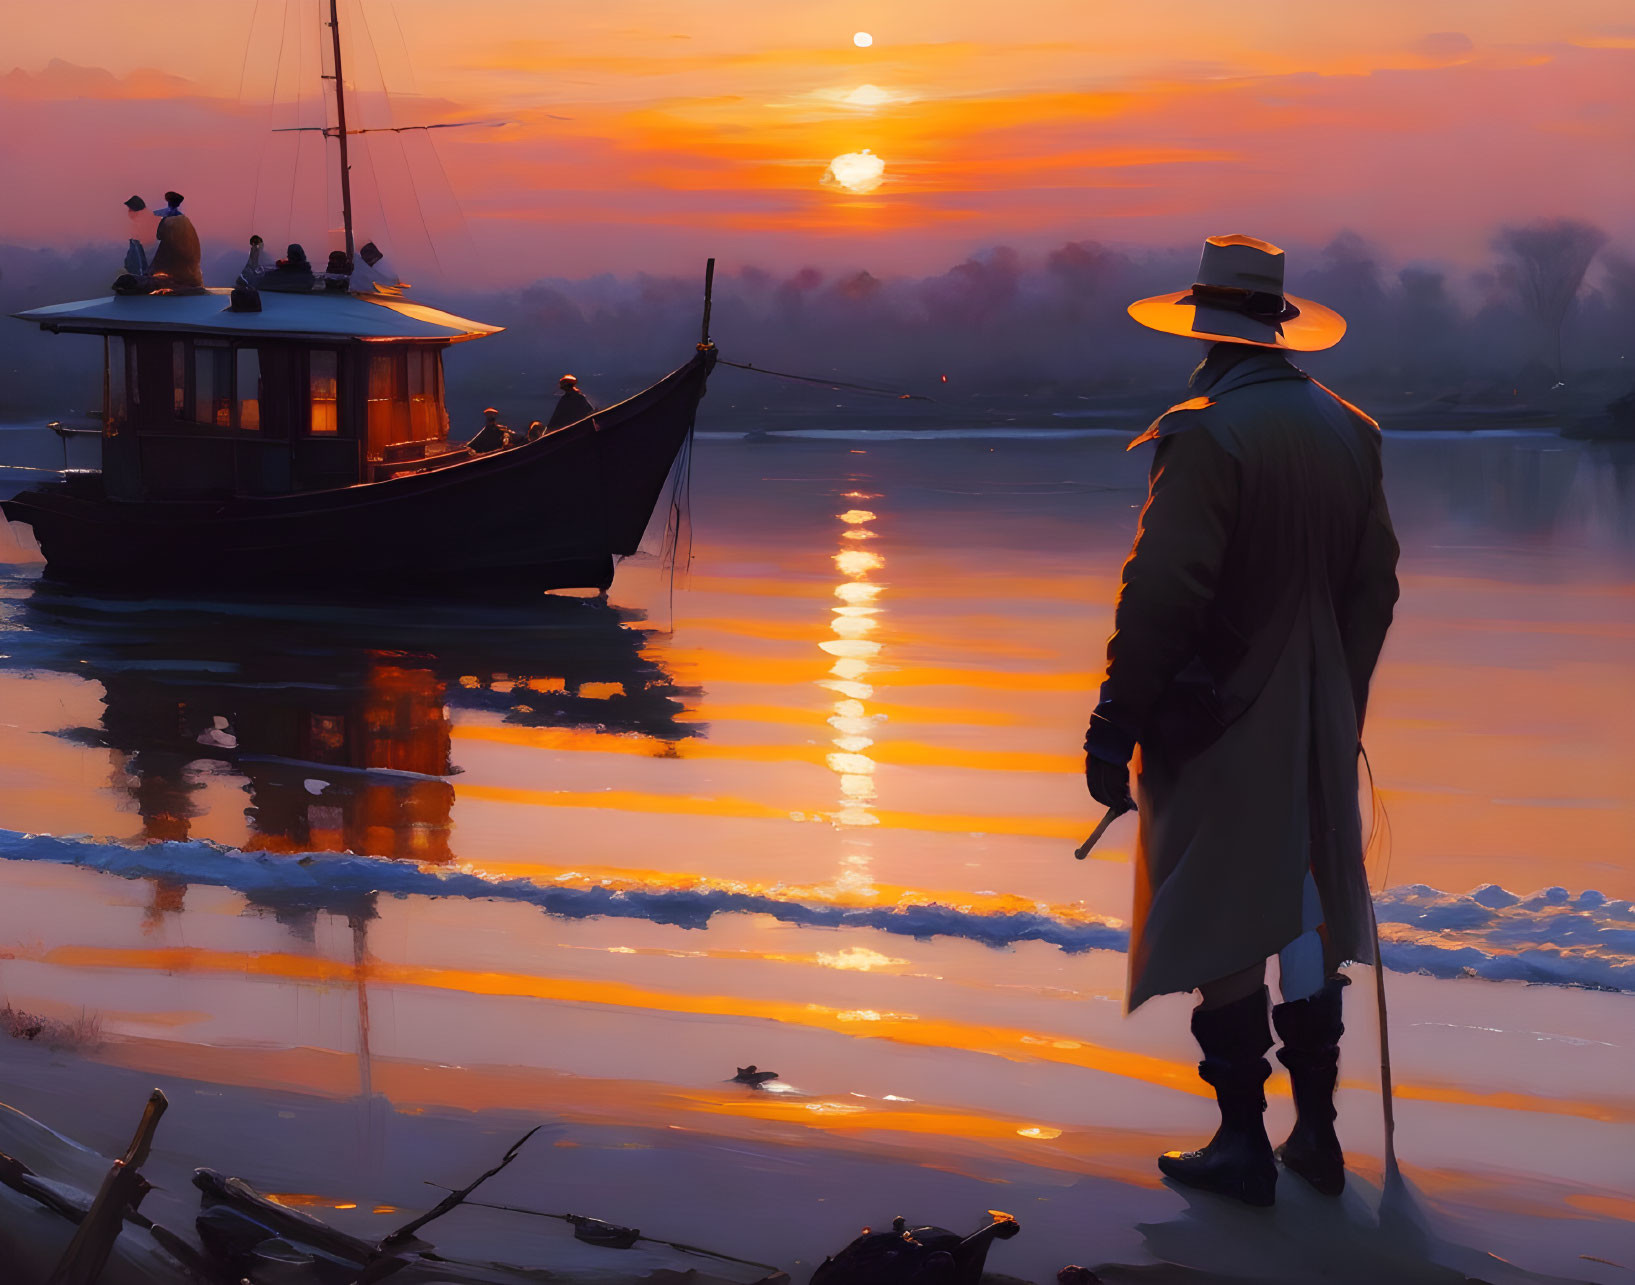 Person in Long Coat and Hat Watches Boat on Serene River at Sunset